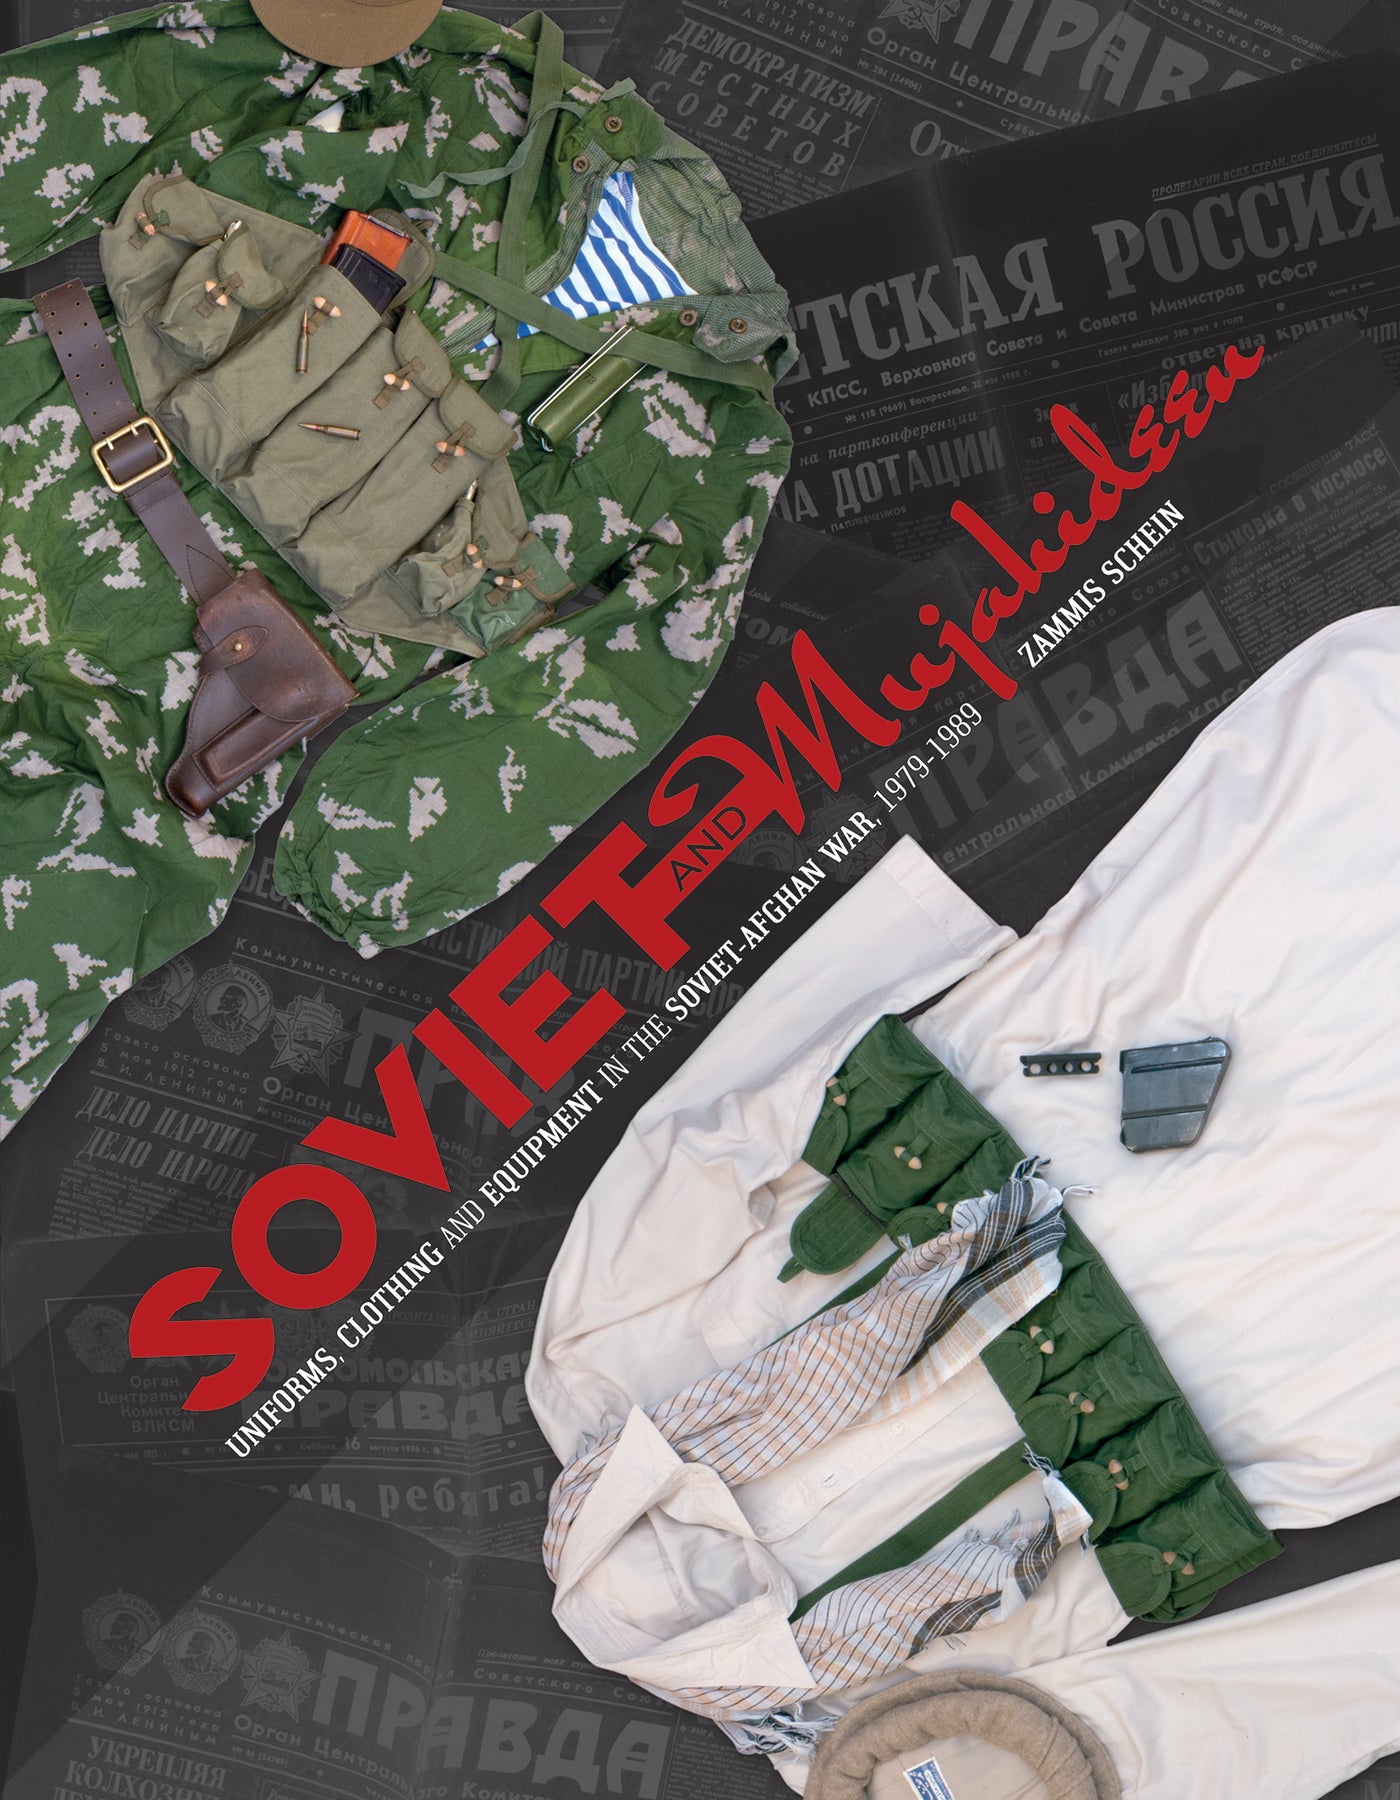 Soviet and Mujahideen Uniforms, Clothing, and Equipment in the Soviet-Afghan War, 1979-1989